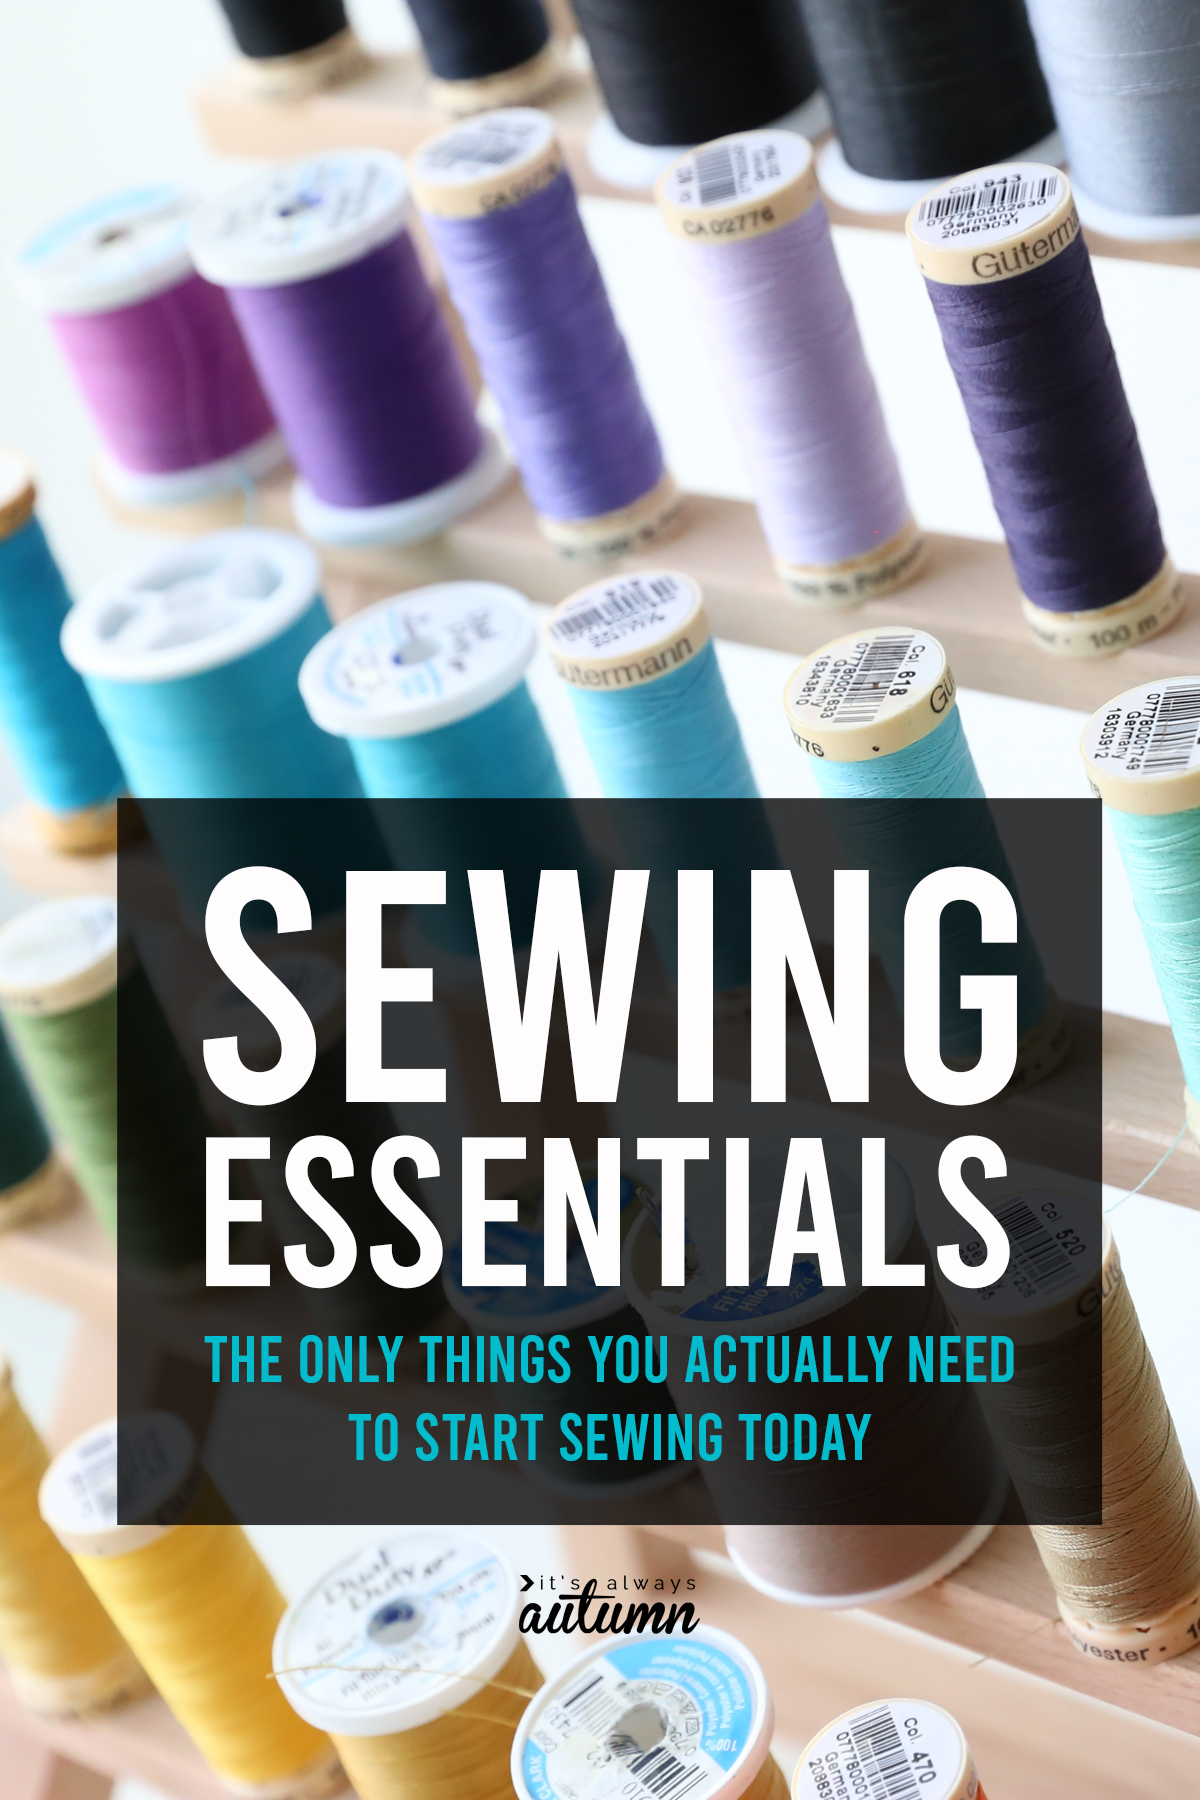 You DON'T need a huge amount of supplies to start sewing - just these sewing essentials.